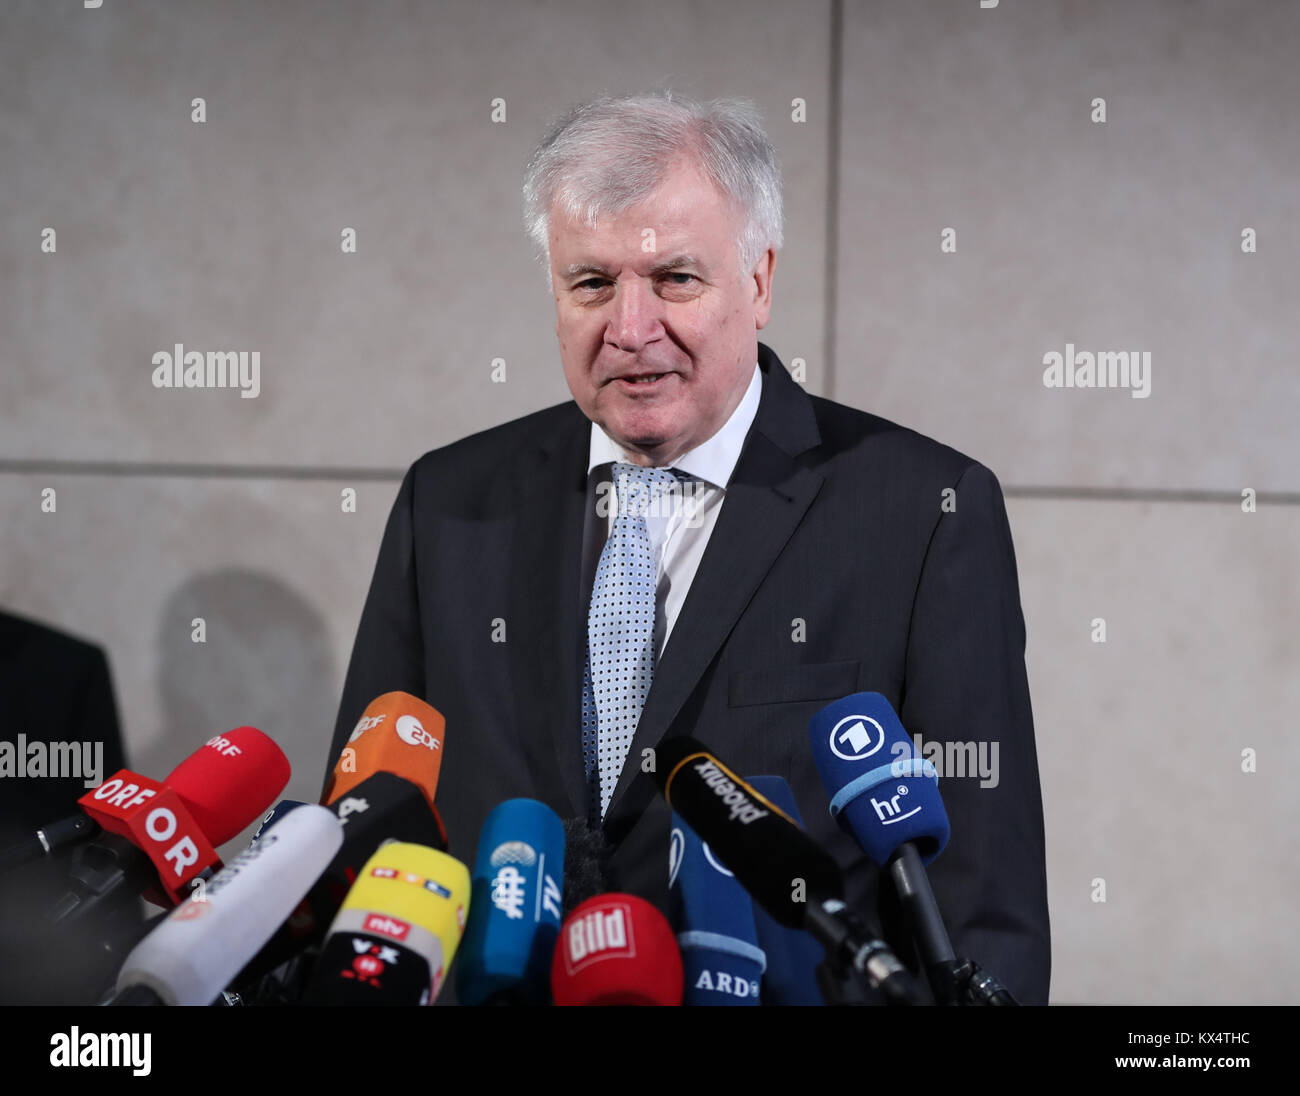 Berlin, Germany. 7th Jan, 2018. Leader of German Christian Social Union (CSU) Horst Seehofer speaks before the exploratory talks for a new coalition government between the Christian Democratic Union (CDU), the CSU and the Social Democratic Party (SPD) at the headquarters of SPD in Berlin, capital of Germany, on Jan. 7, 2018. Credit: Shan Yuqi/Xinhua/Alamy Live News Stock Photo